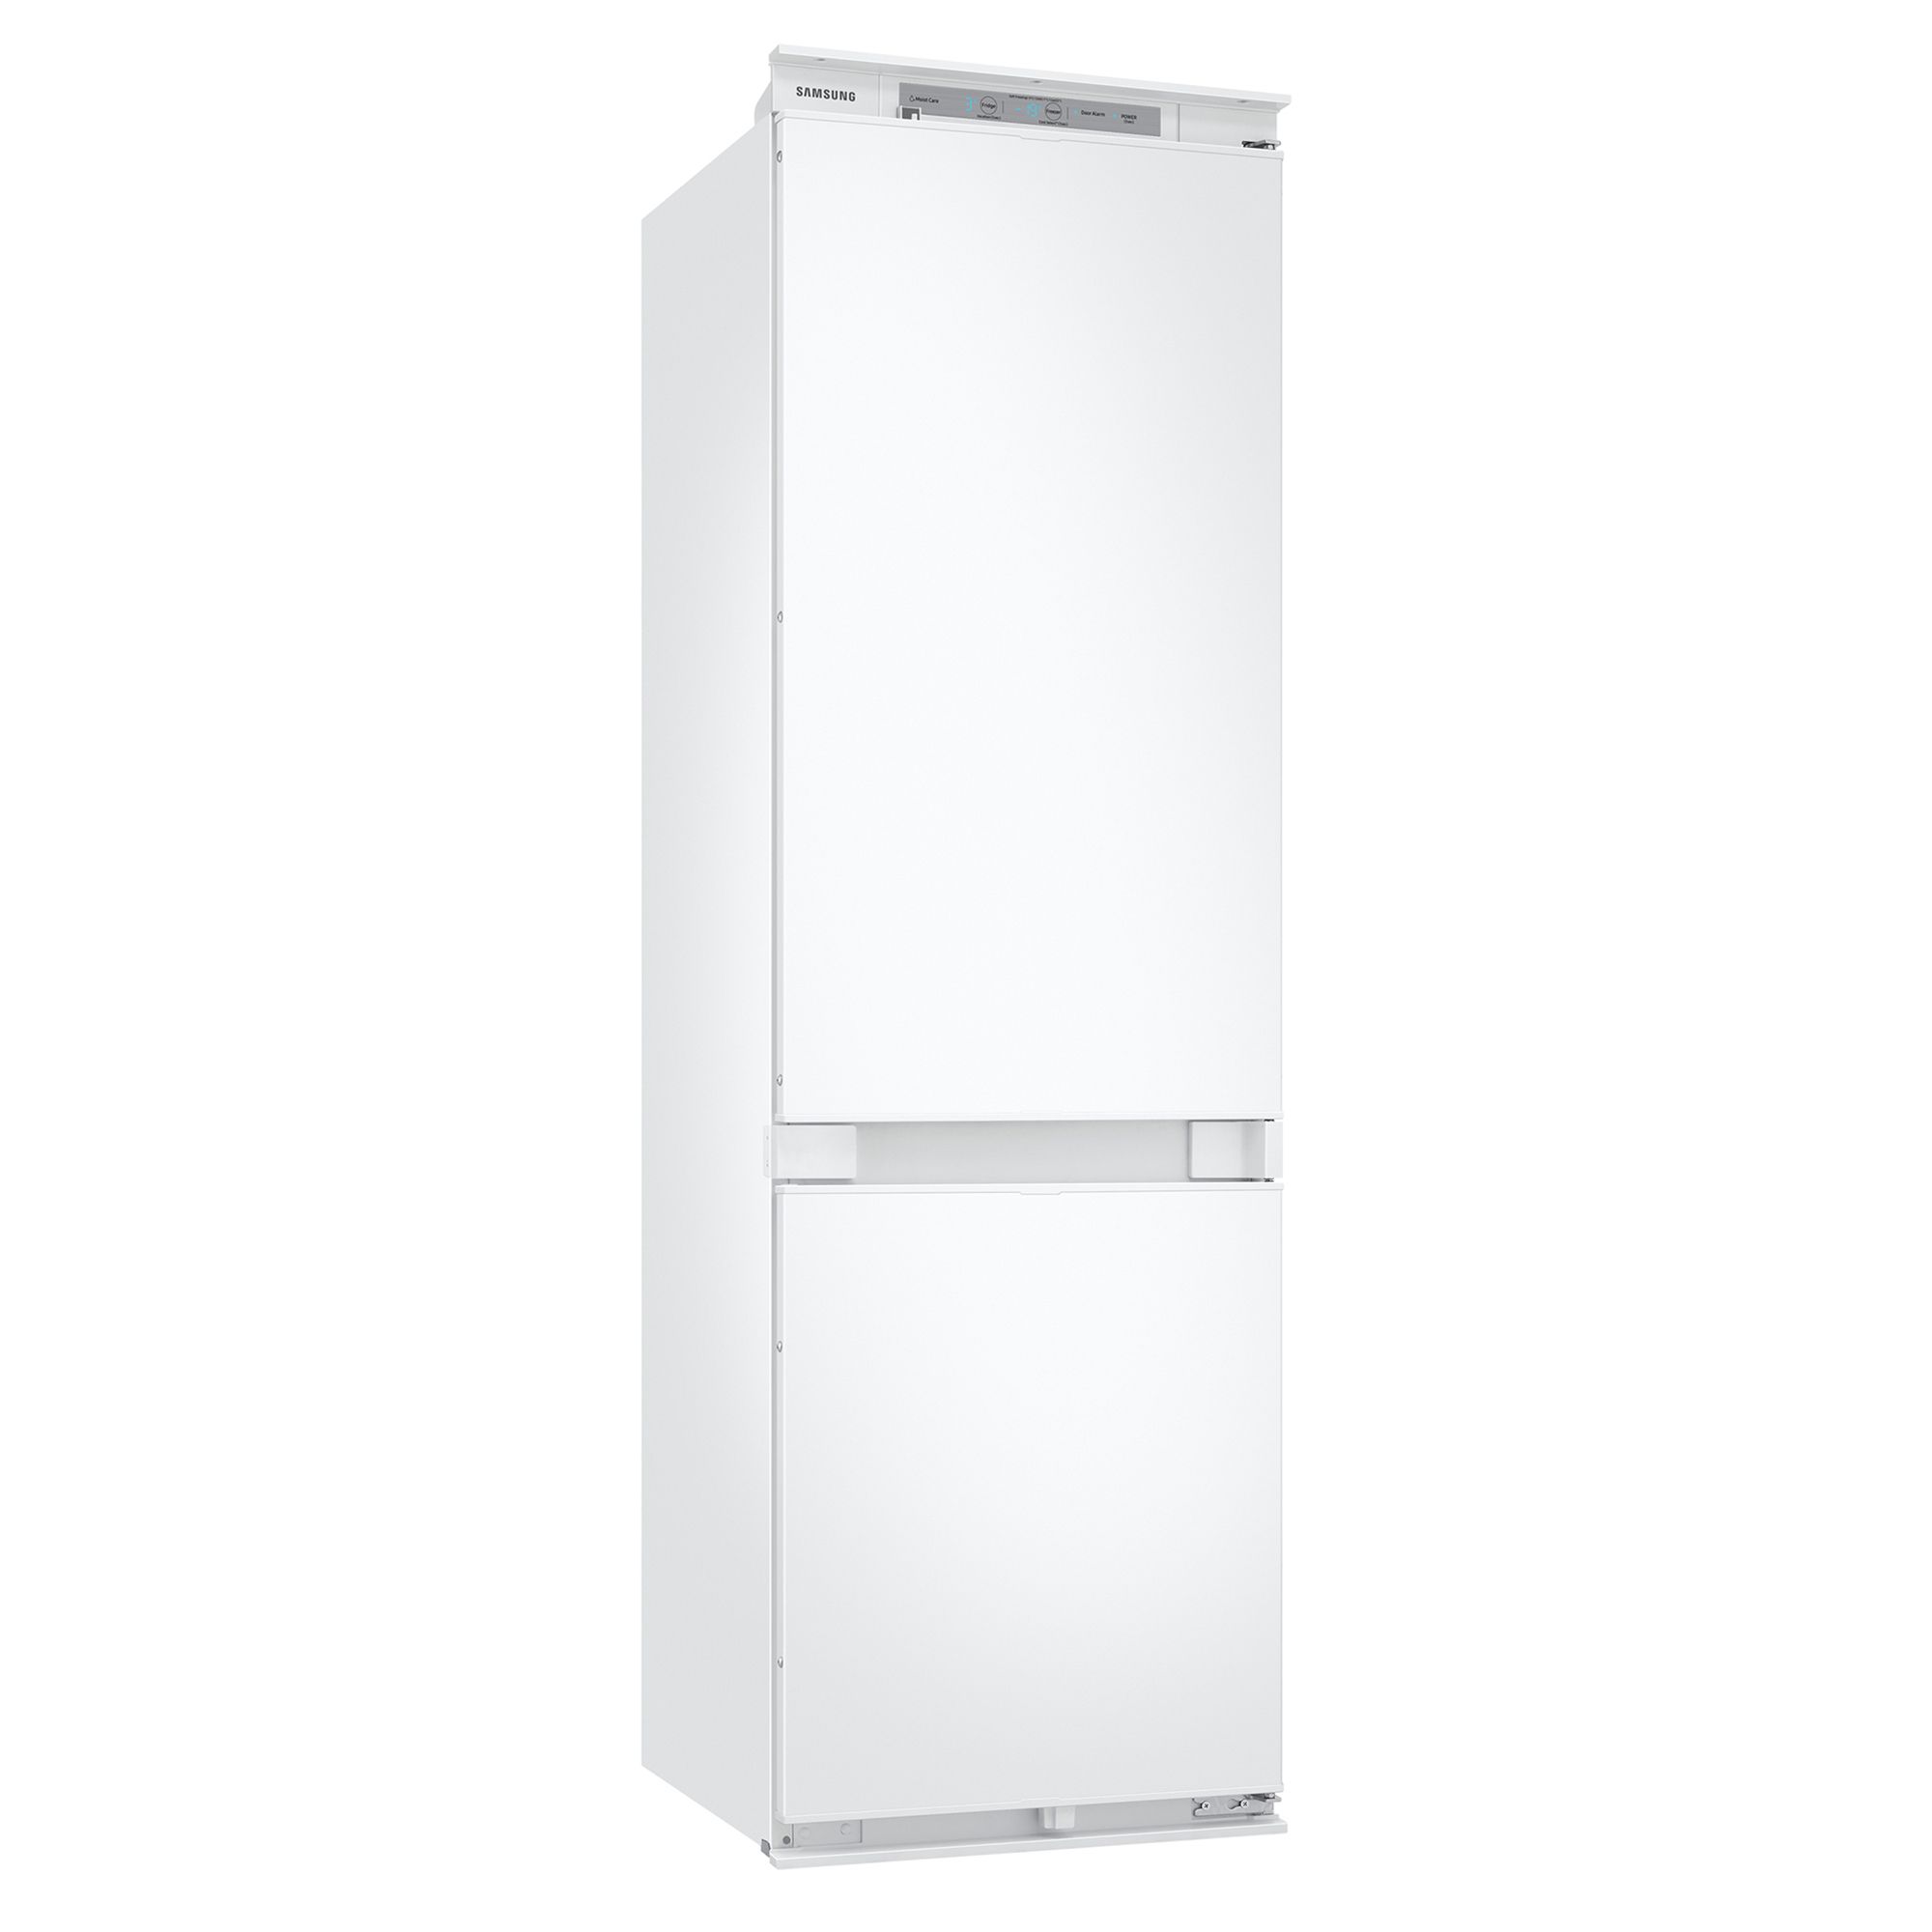 Samsung BRB26705DWW_WH Built-in Frost free Fridge freezer - White